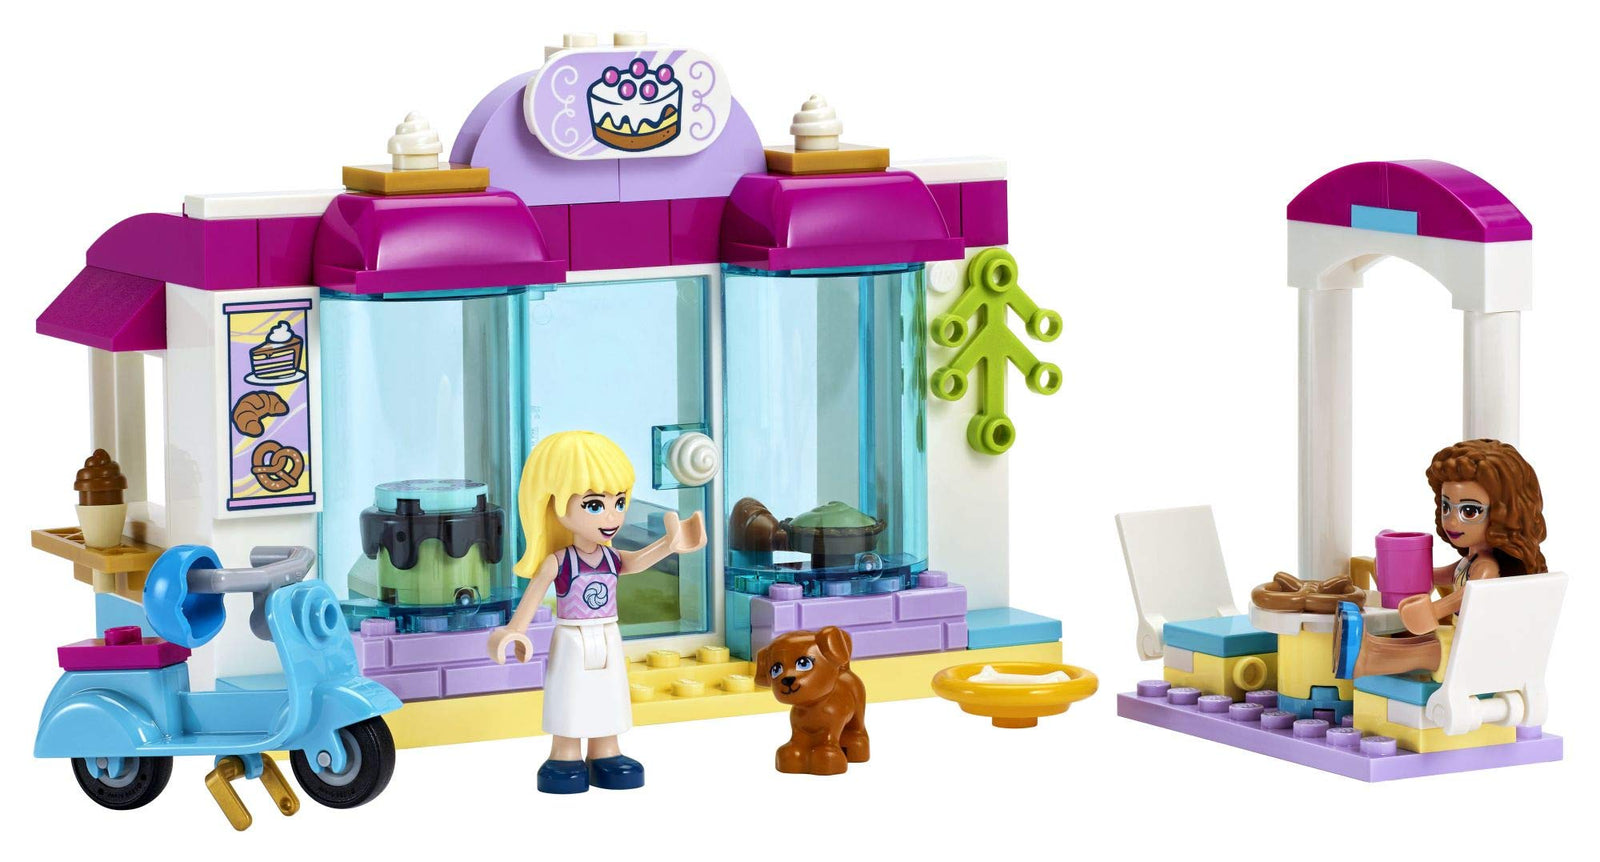 LEGO Friends Heartlake City Bakery 41440 Building Kit; Kids Café Toy Playset Friends Stephanie and Olivia; Collectible Toy, New 2021 (99 Pieces)